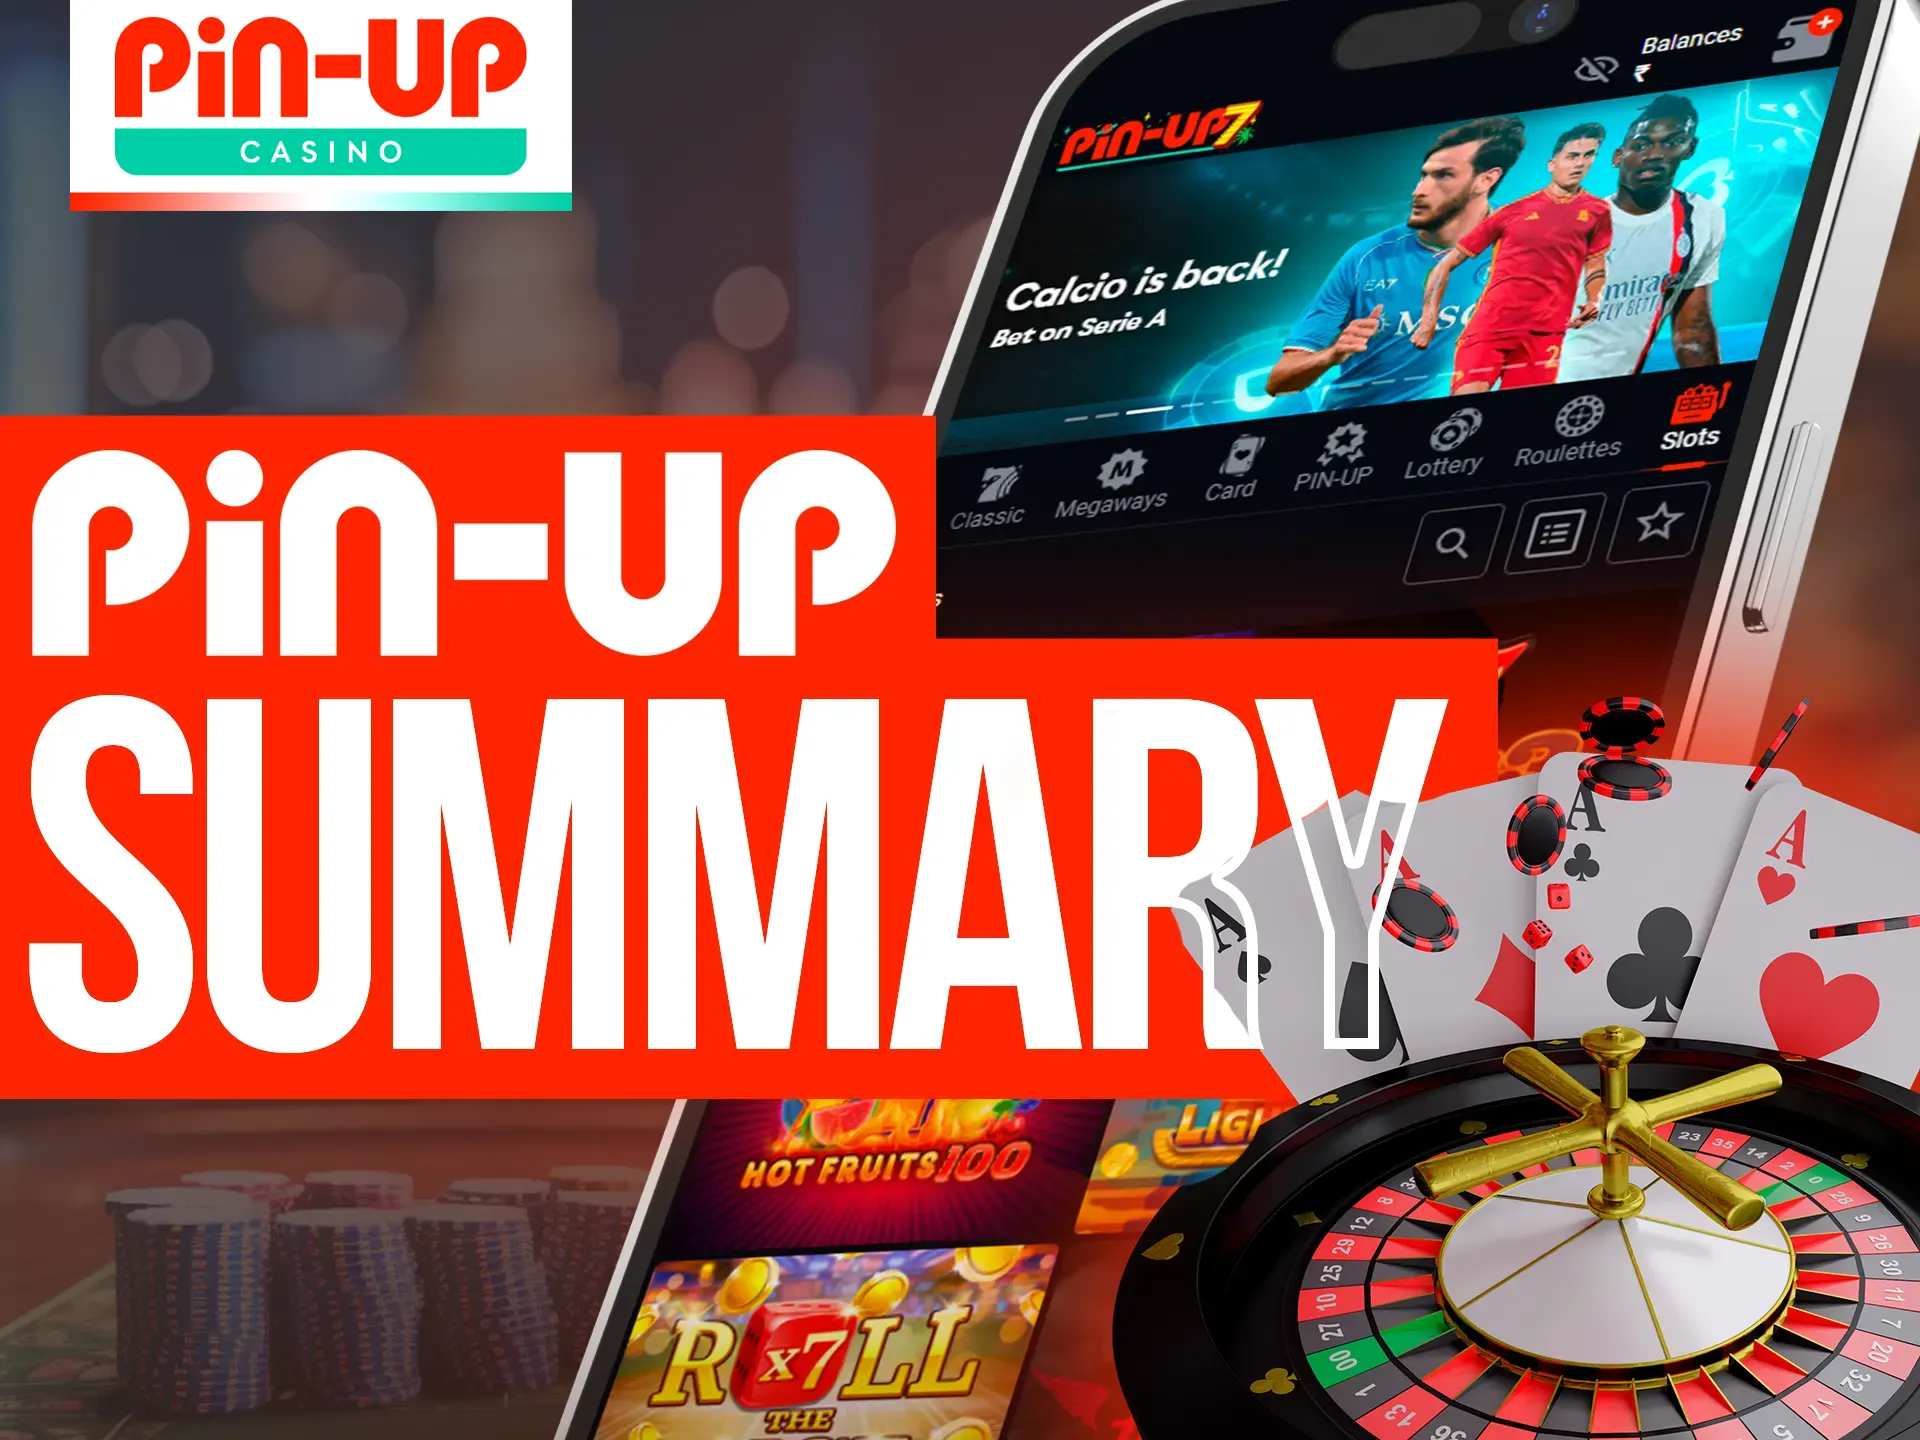 The Pin-Up casino app is the greatest method to enjoy the pleasures of casino gaming.